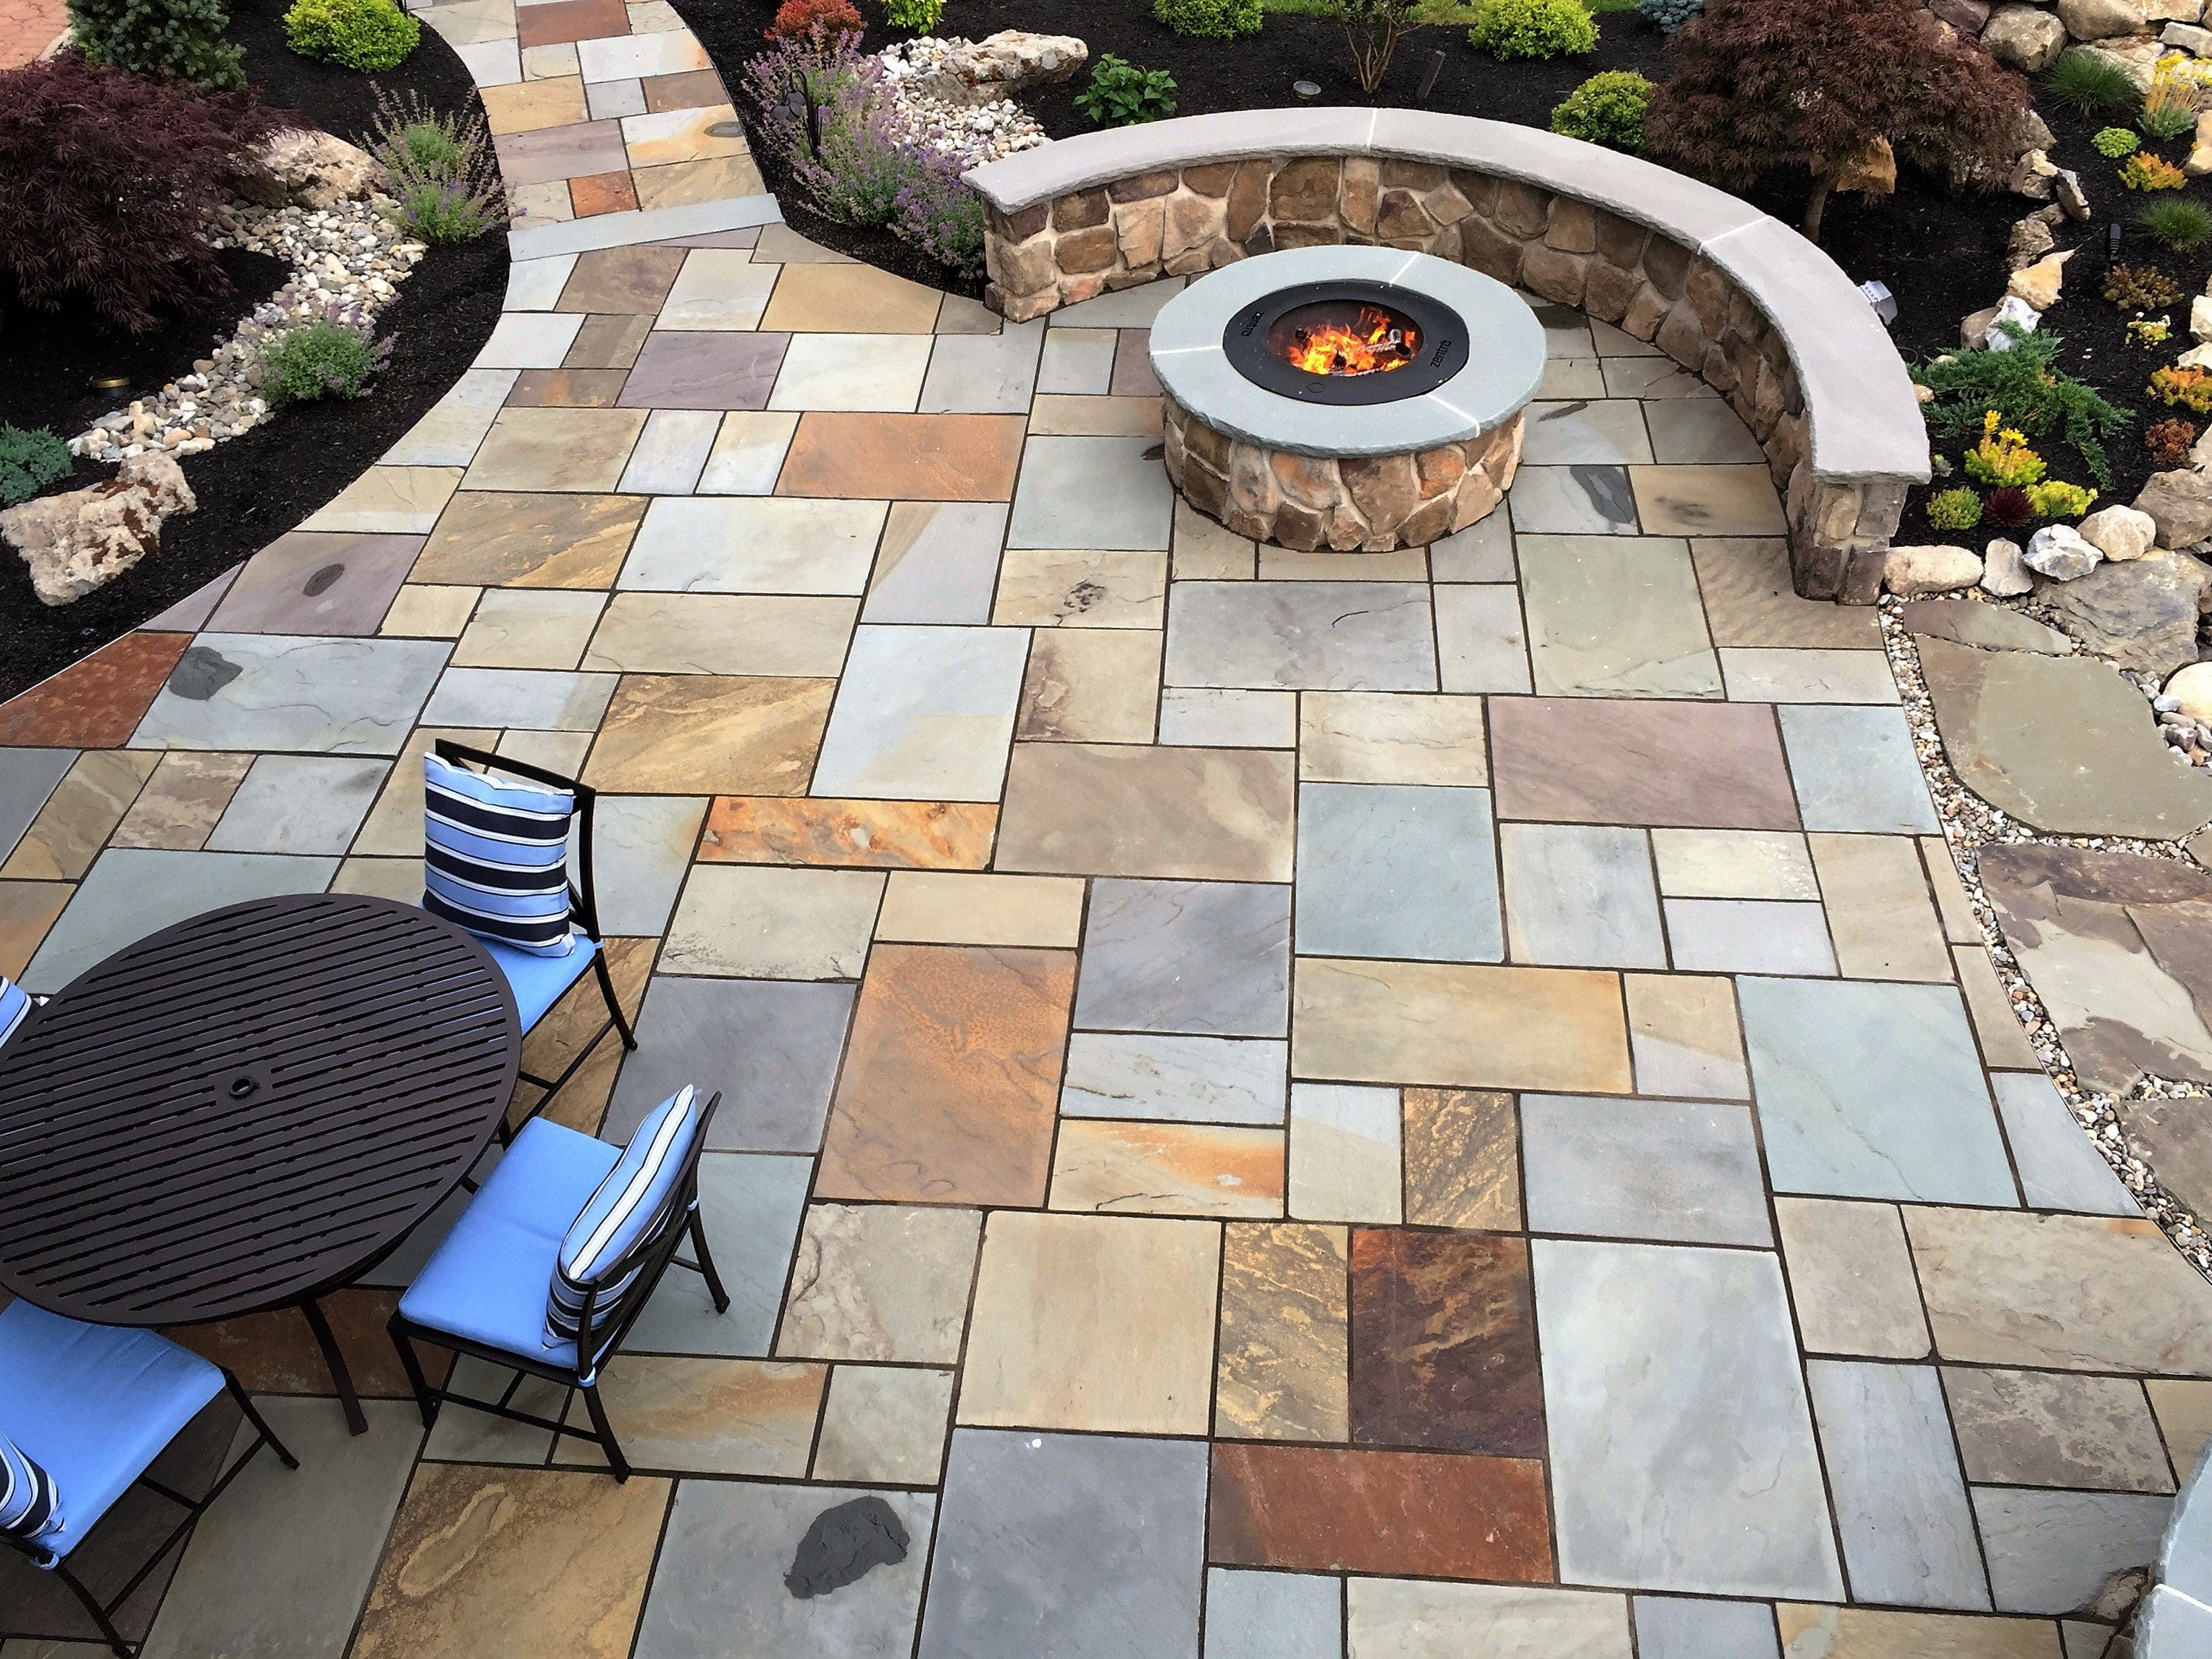 How To Find The Best Outdoor Patio Designer In Nj,Small Backyard Modern Landscape Design For Small Spaces